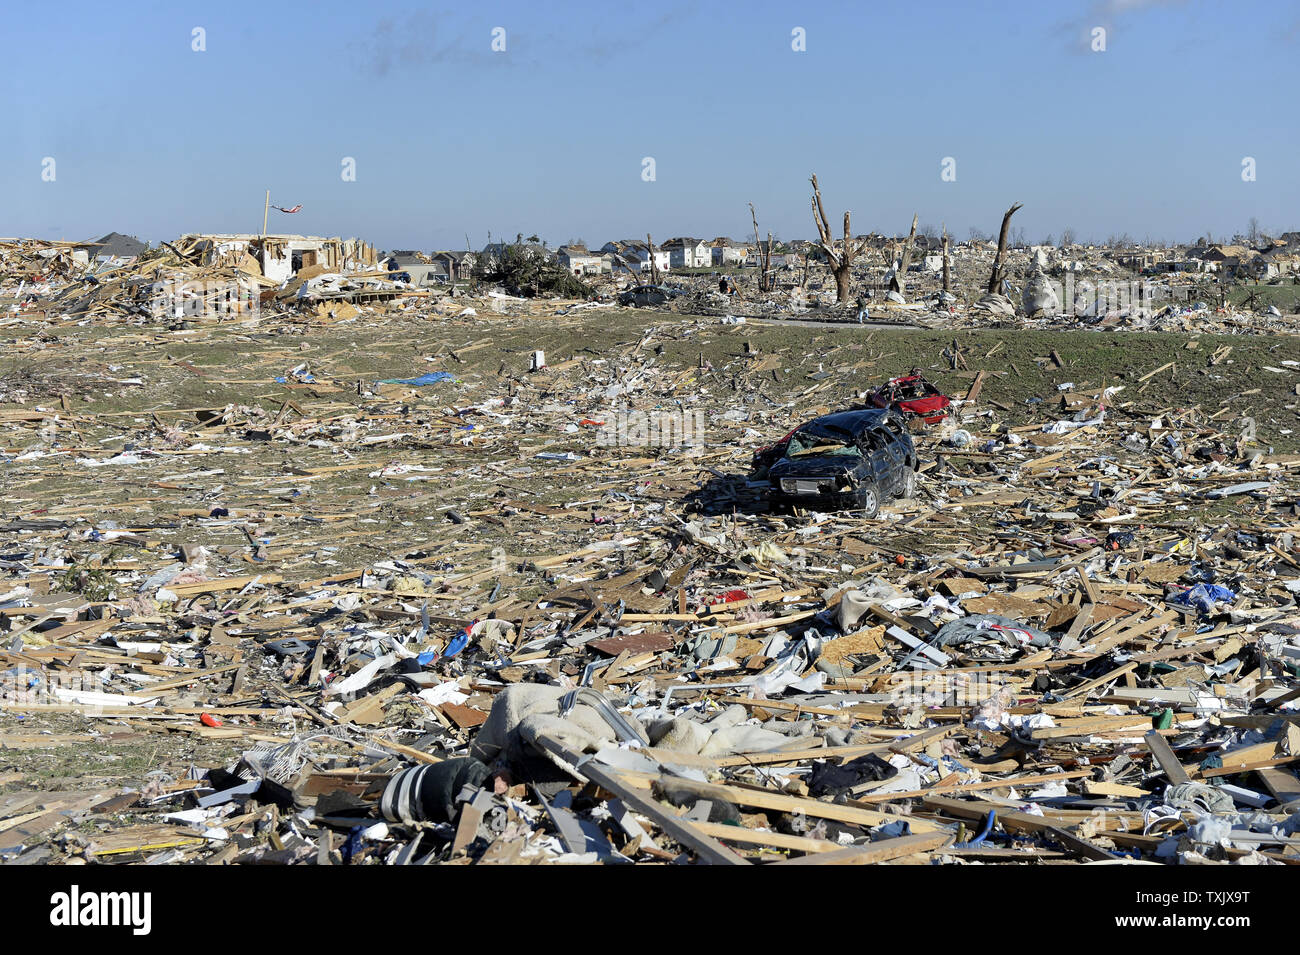 An open field is filled with debris following a tornado in Washington, Illinois on November 18, 2013. Six people died and hundreds of homes were destroyed in Illinois as 81 tornadoes were sighted on November 17 throughout 12 midwest states including the EF4 tornado that struck Washington, Illinois.     UPI/Brian Kersey.     UPI/Brian Kersey Stock Photo